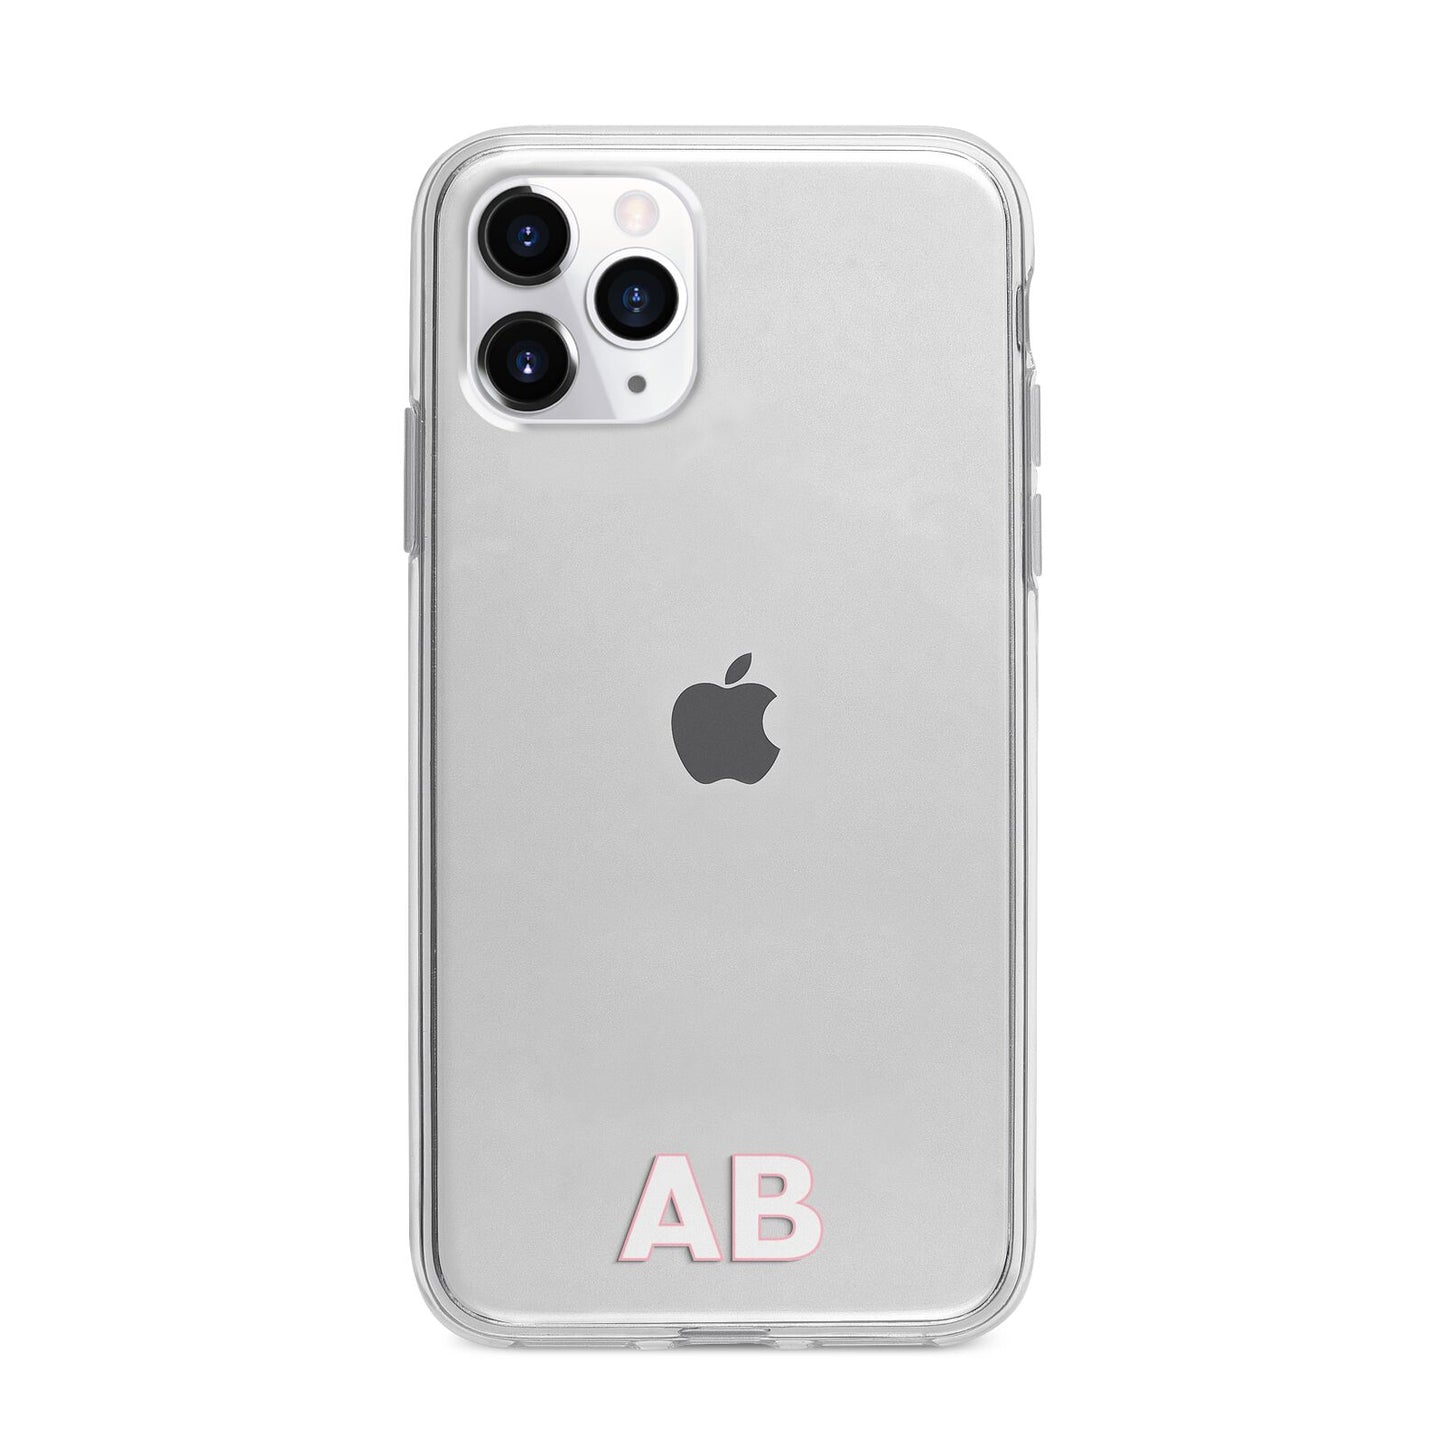 Sans Serif Initials Apple iPhone 11 Pro Max in Silver with Bumper Case